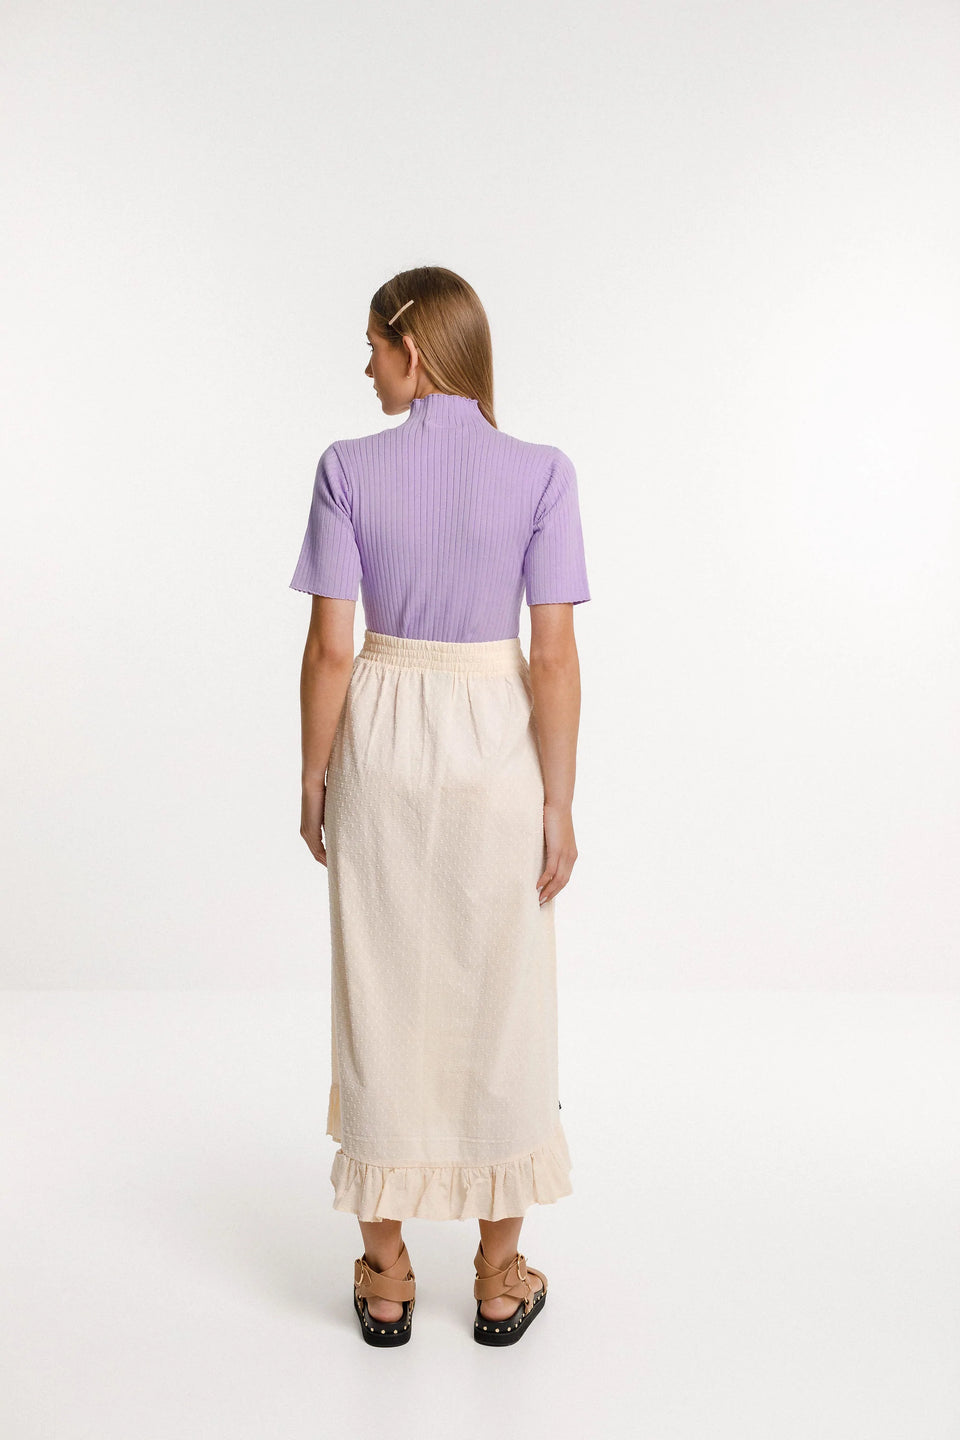 Thing Thing Belle Skirt - French Vanilla